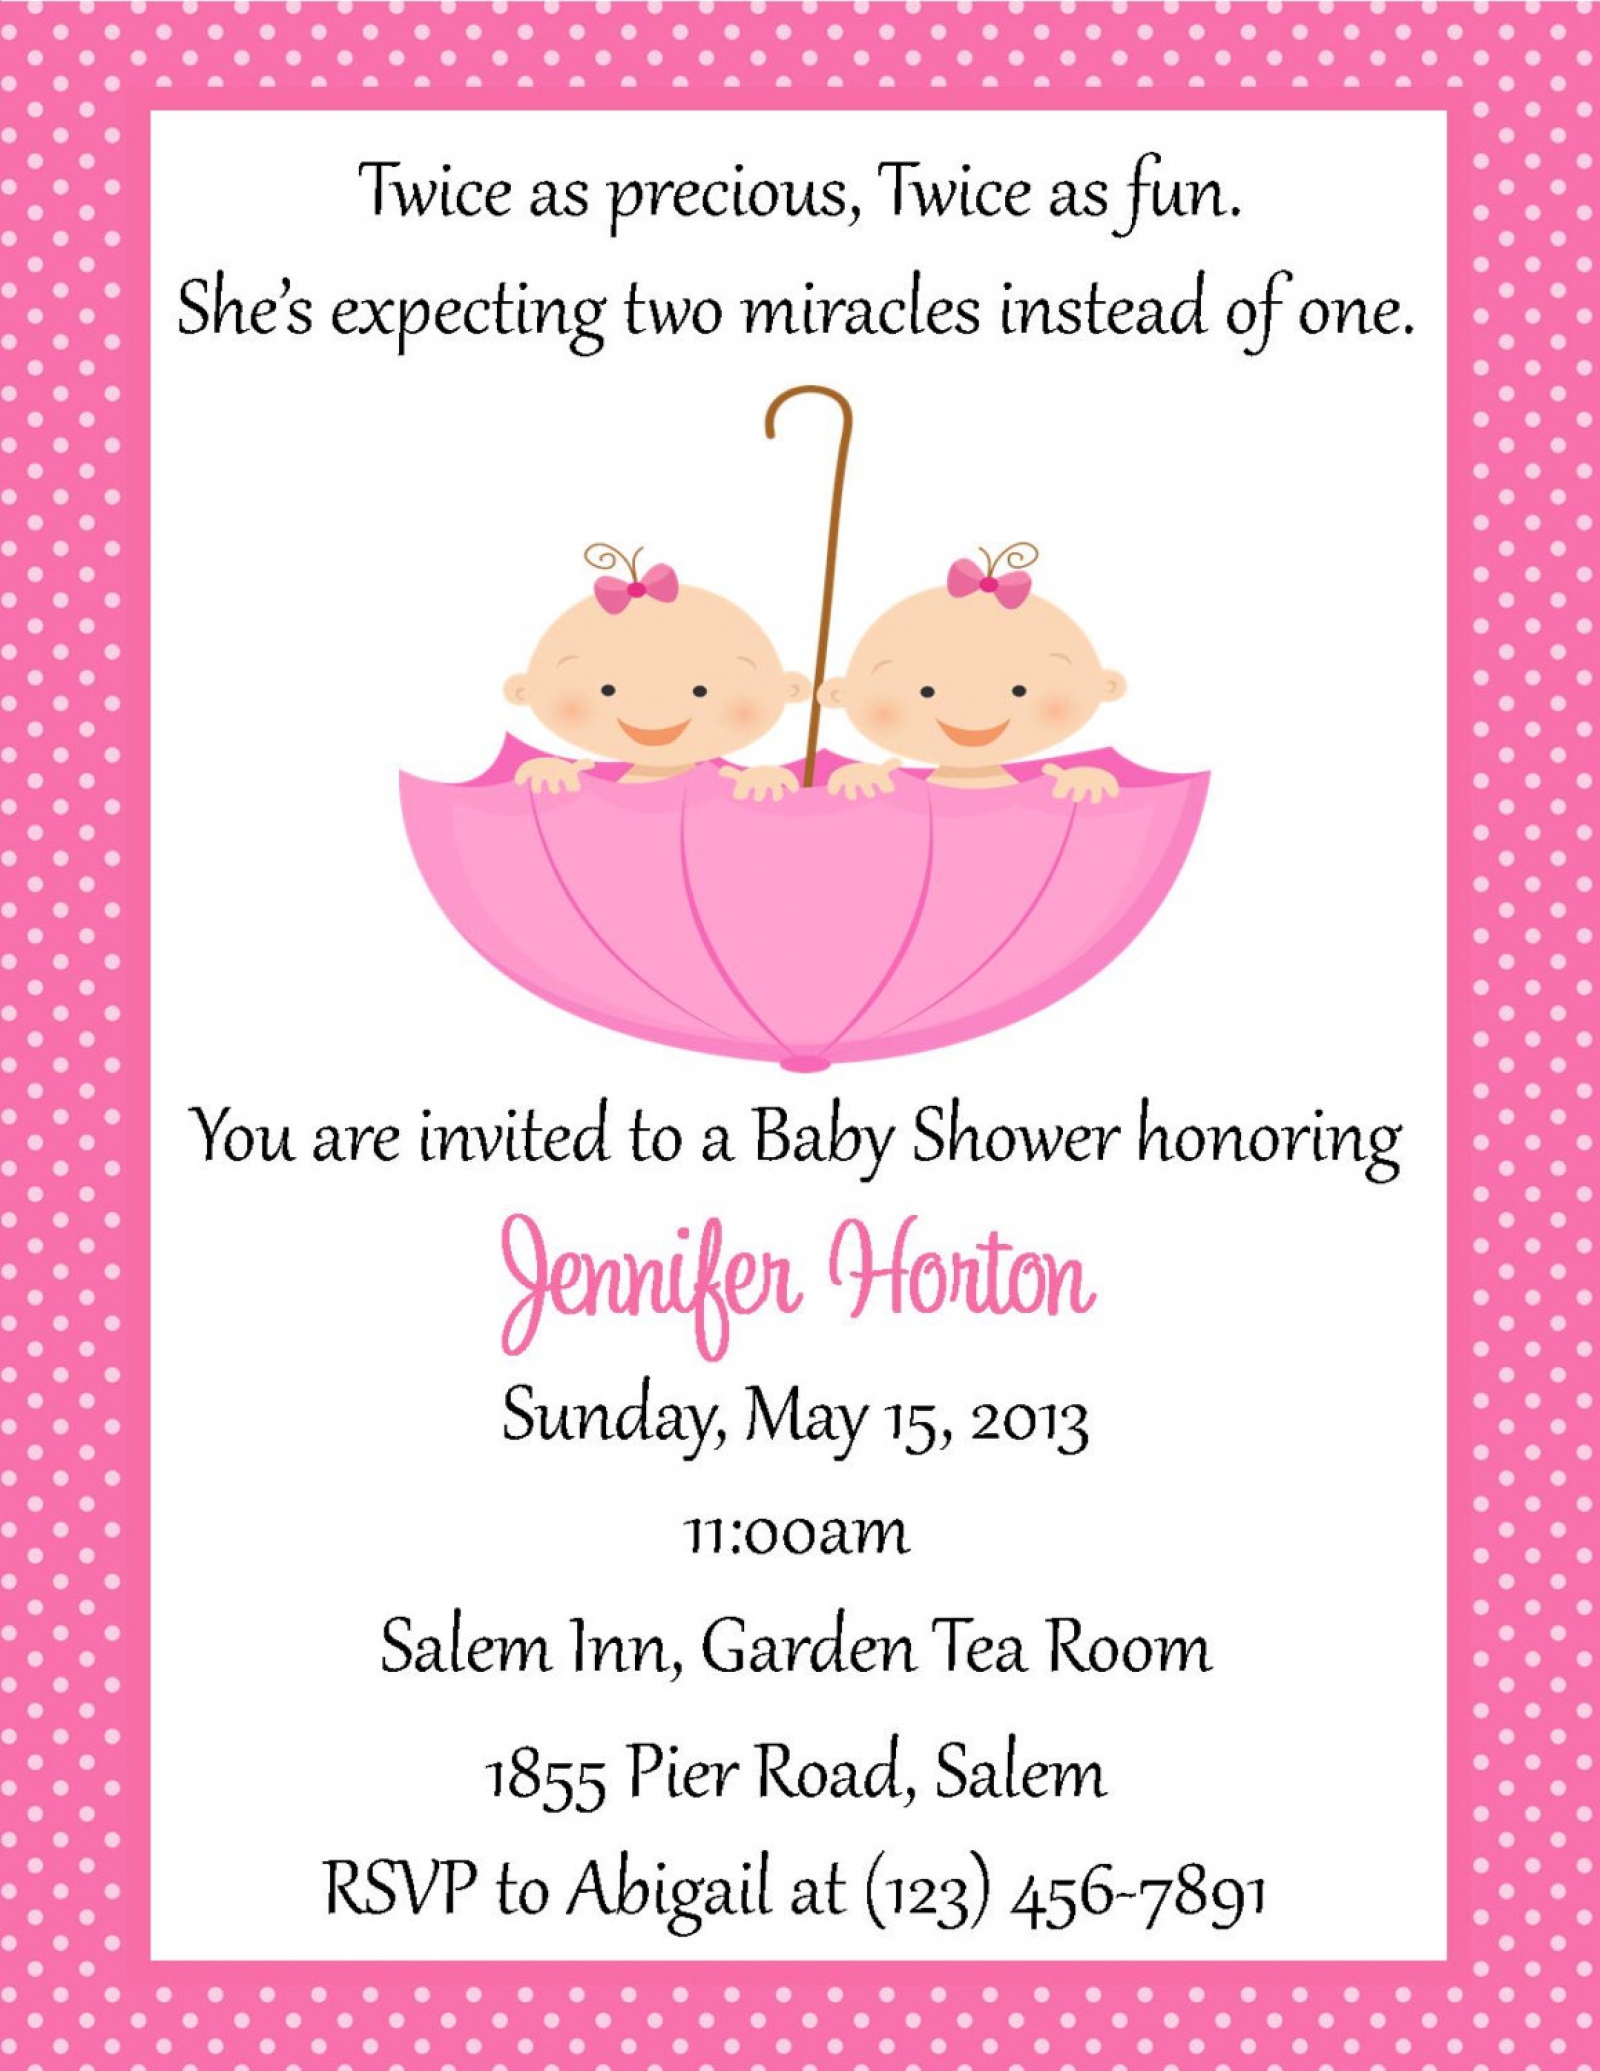 how to print invitations from a digital file